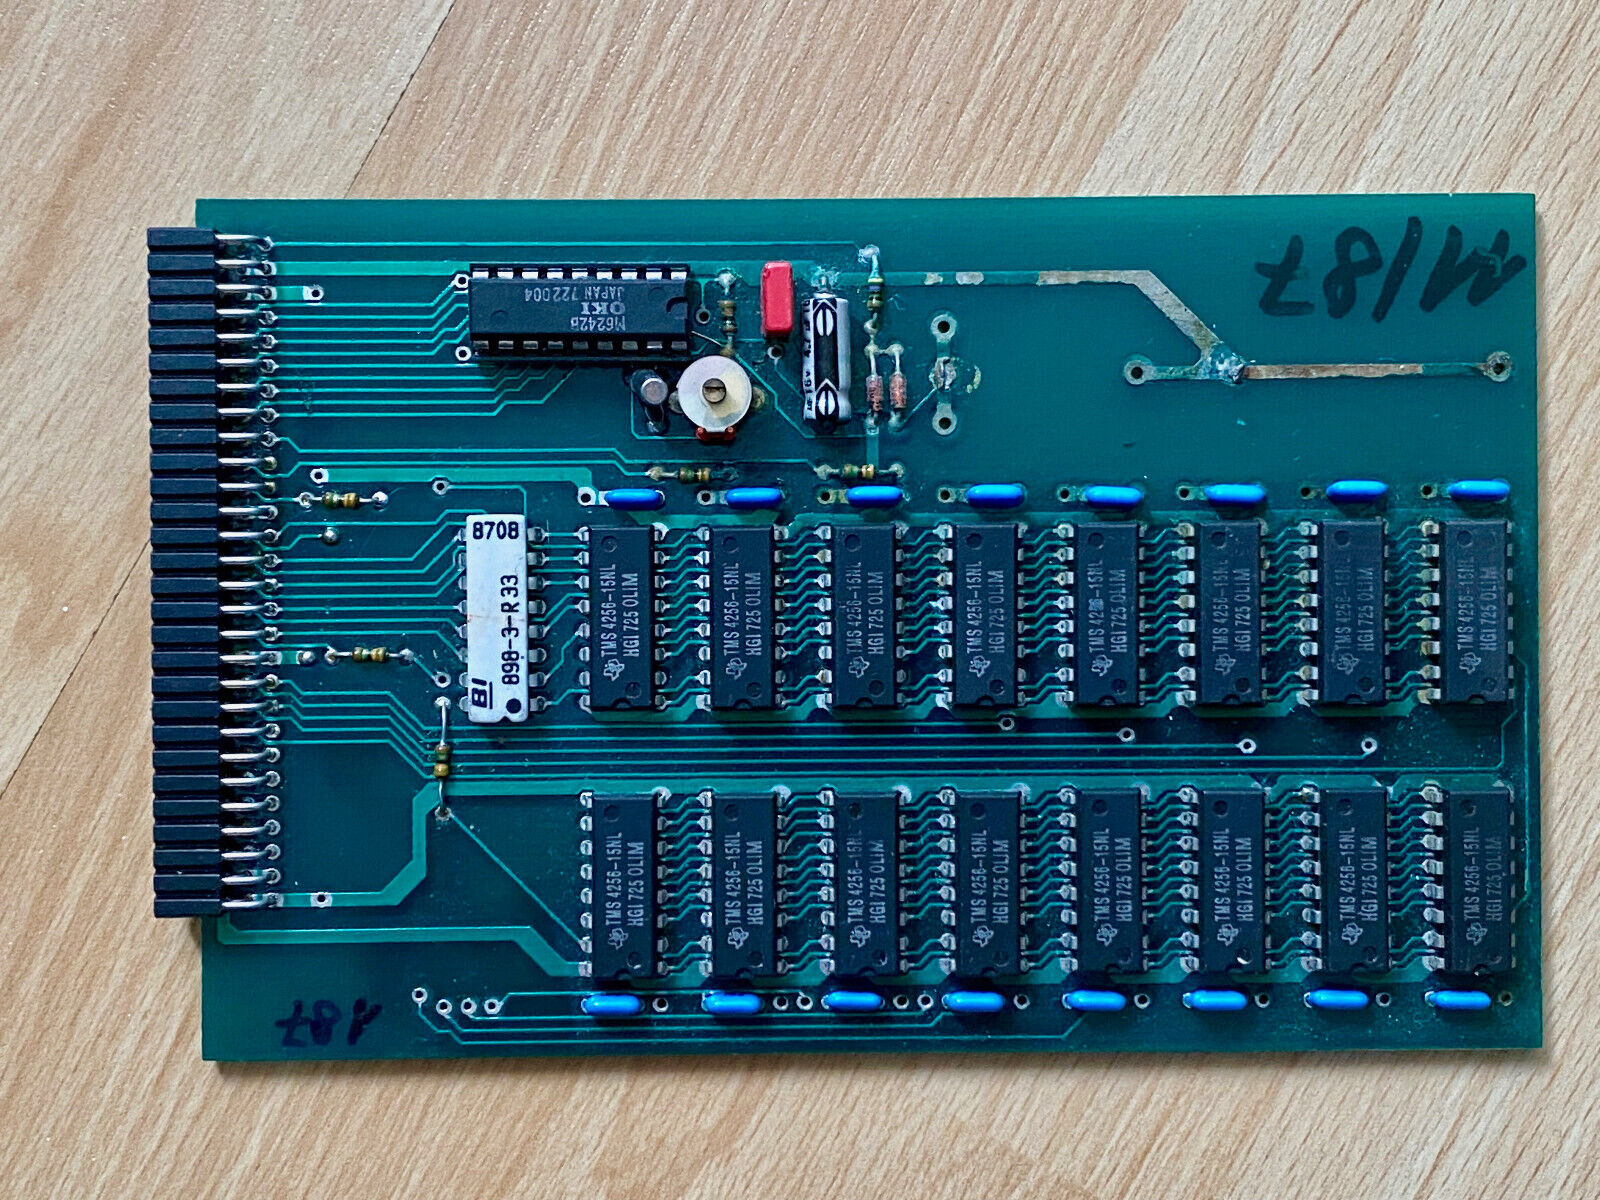 Storage Expansion 512kb for Amiga 500/A500 Defective #03/22